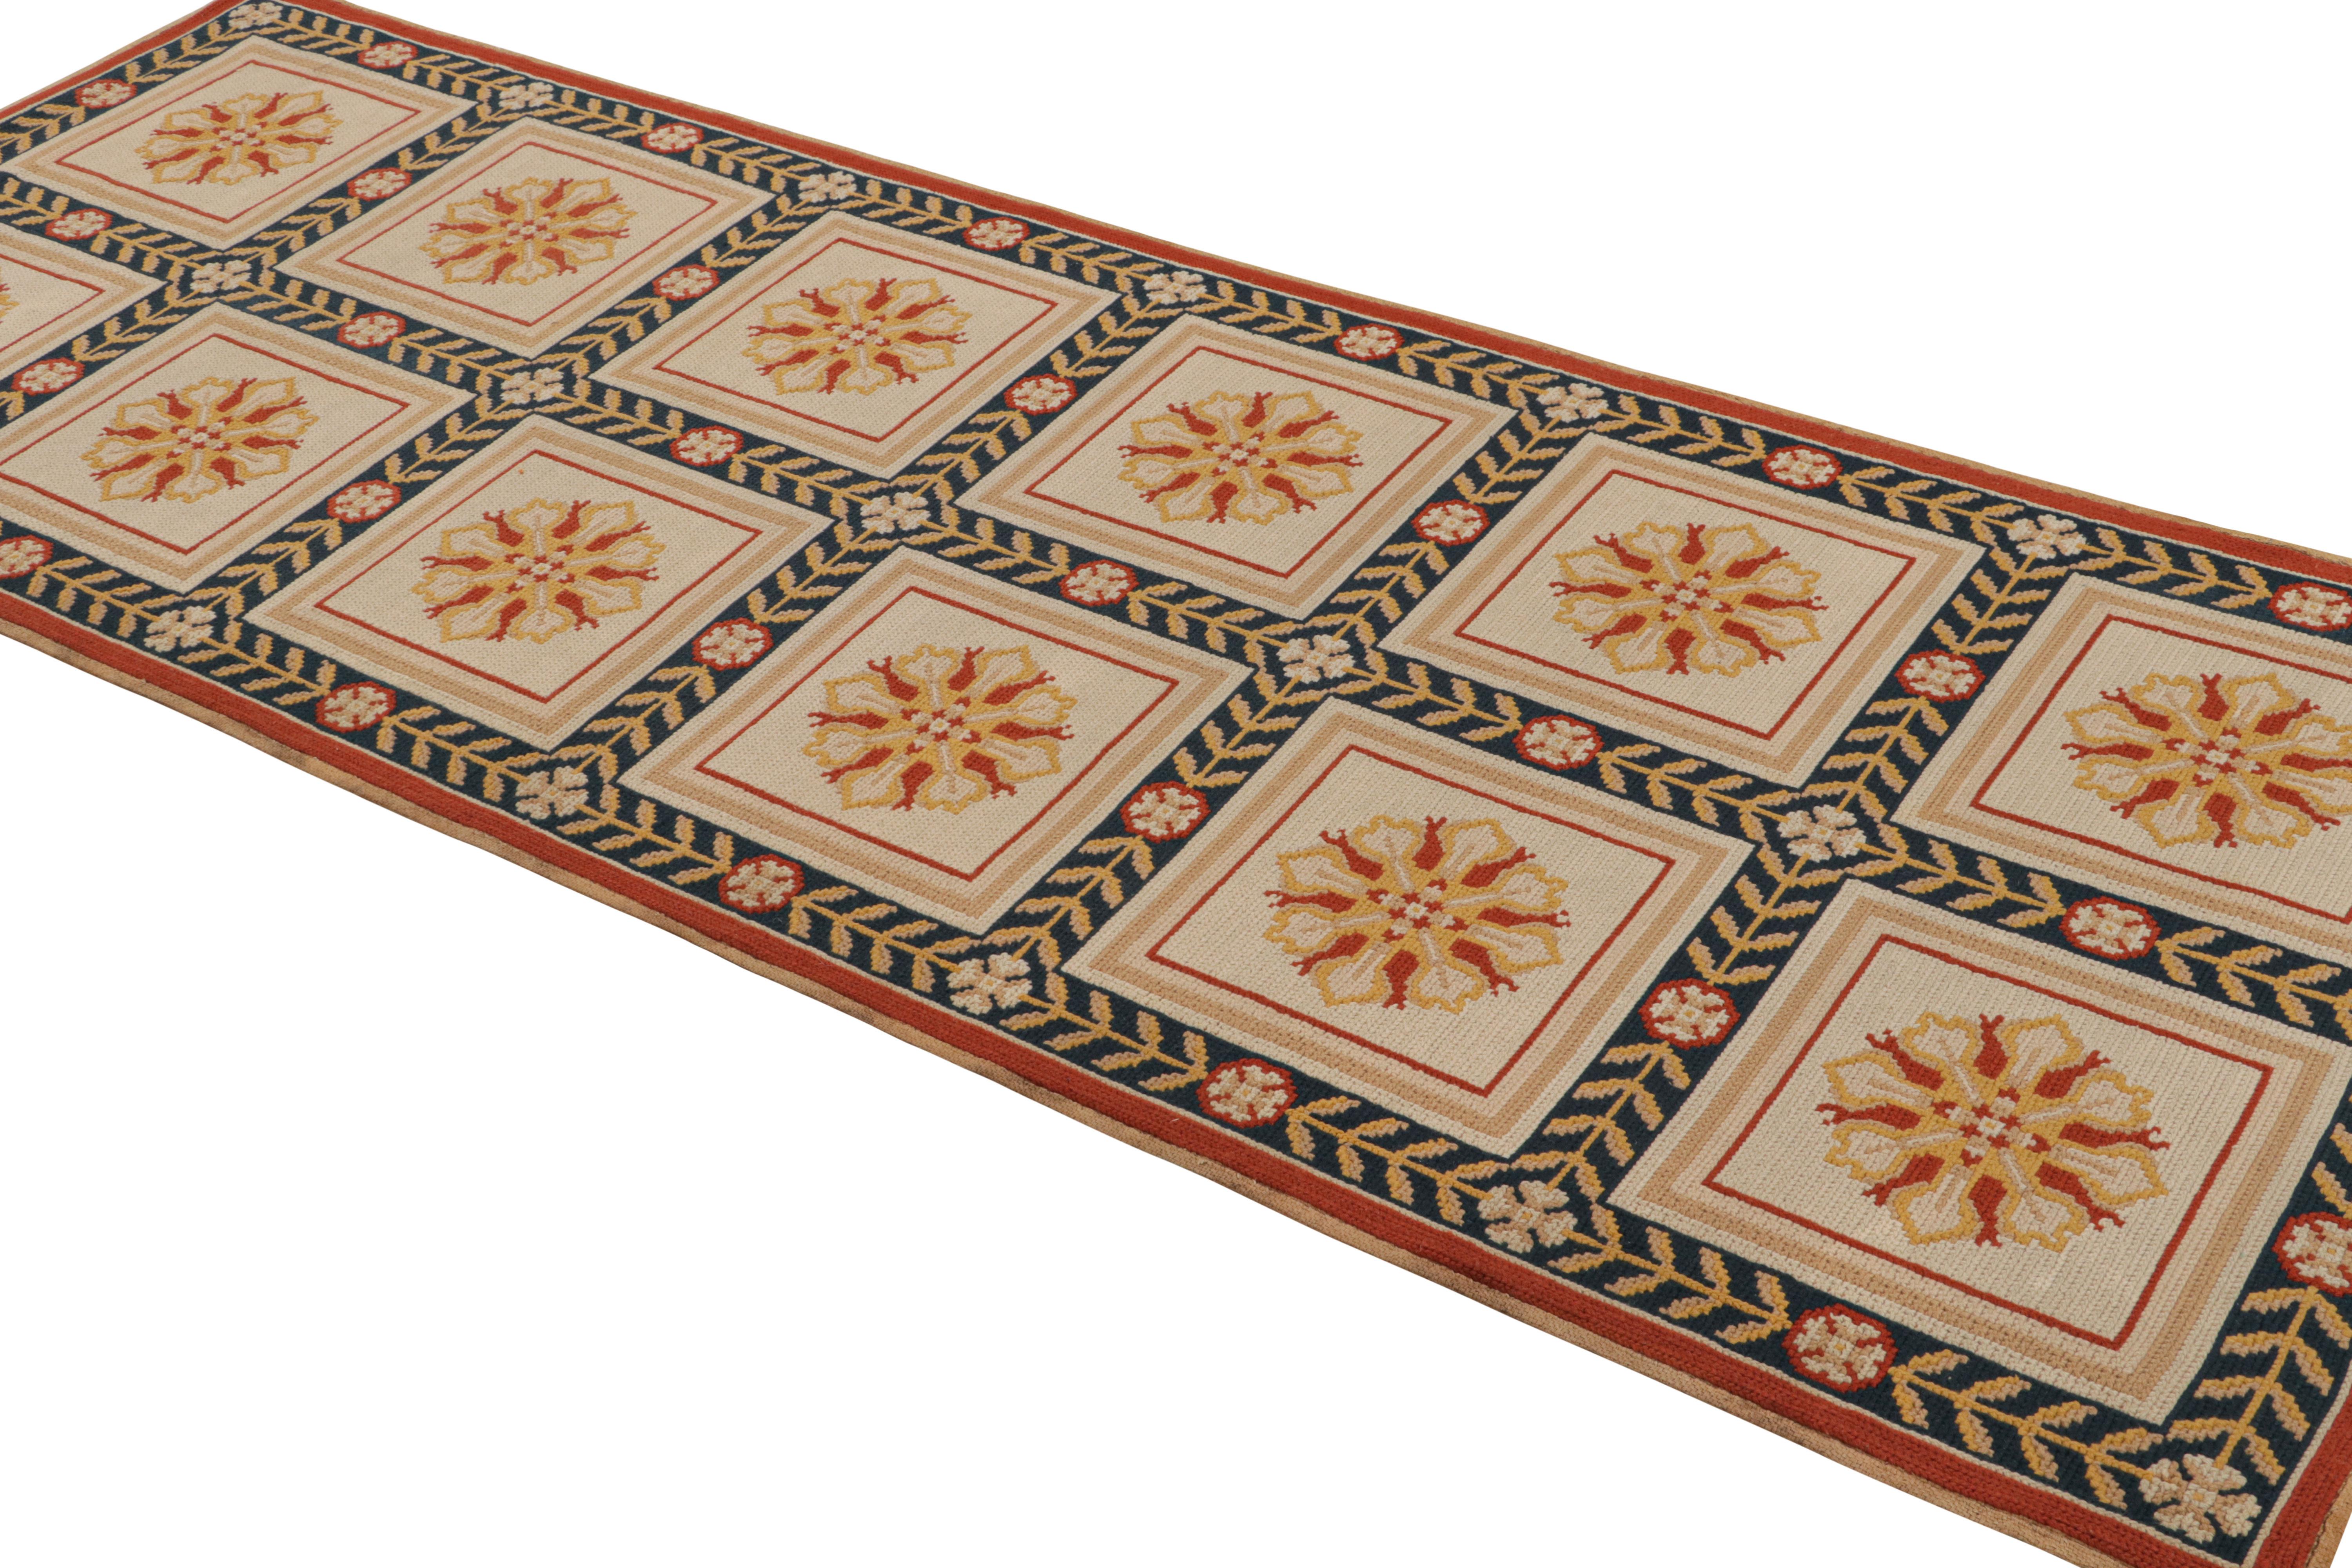 Handmade with wool, this 3×9 antique Arraiolos runner rug originates from Portugal circa 1920-1930, via the provenance of the same name—a particularly coveted tradition of needlepoints by women weavers of this nation known by admirers of the craft